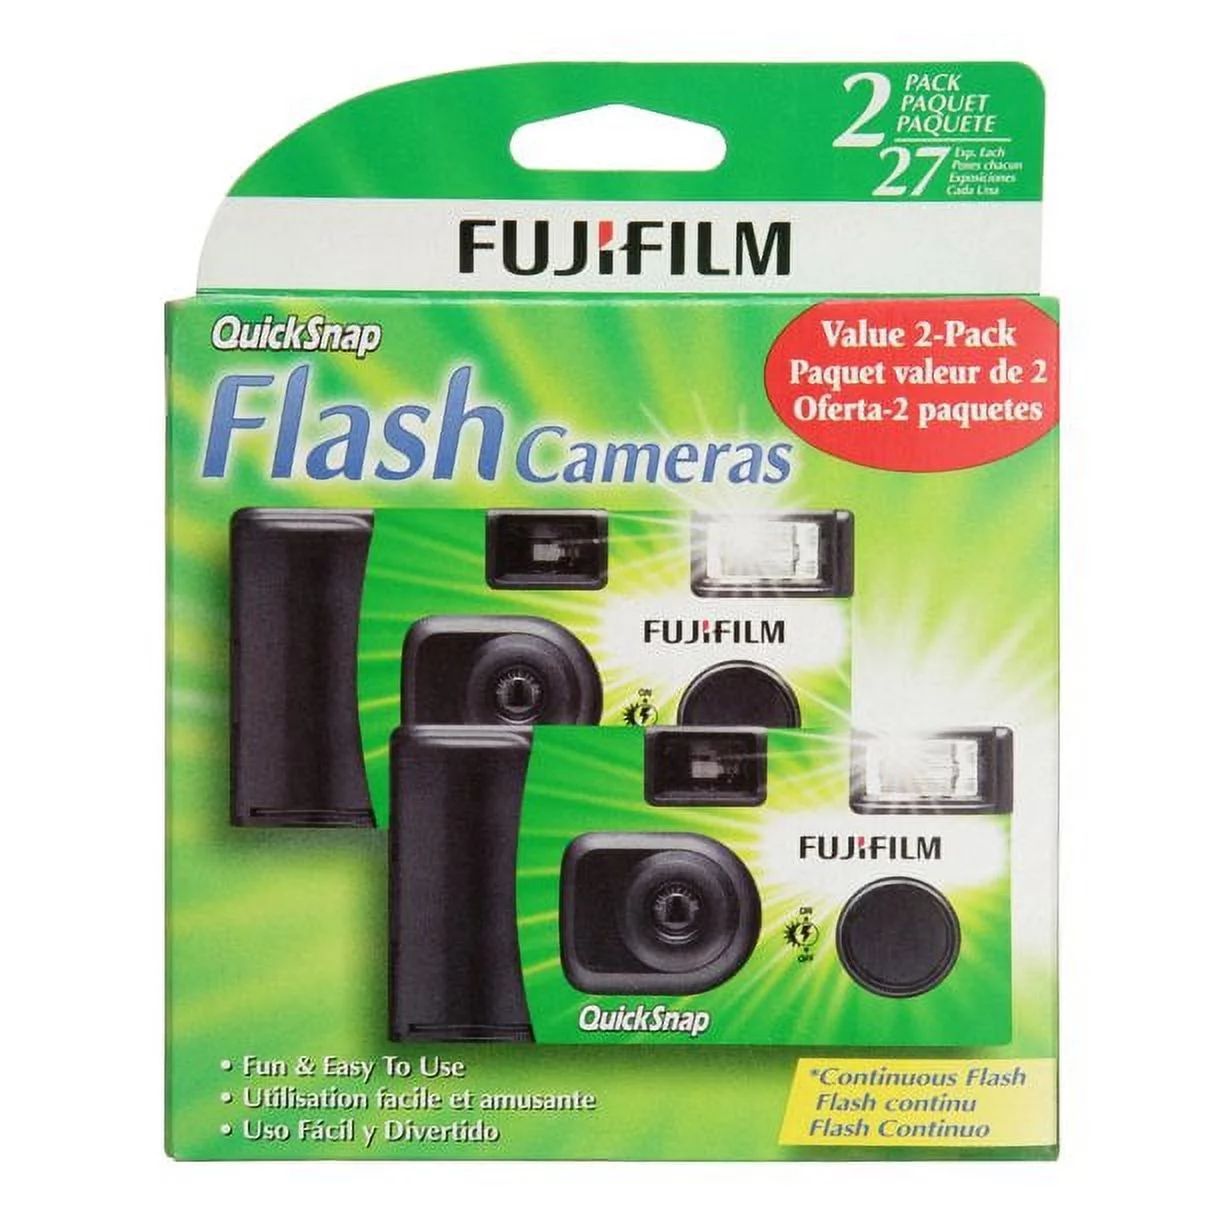 Fujifilm QuickSnap One Time Use 35mm Camera with Flash, 2 Pack | Walmart (US)